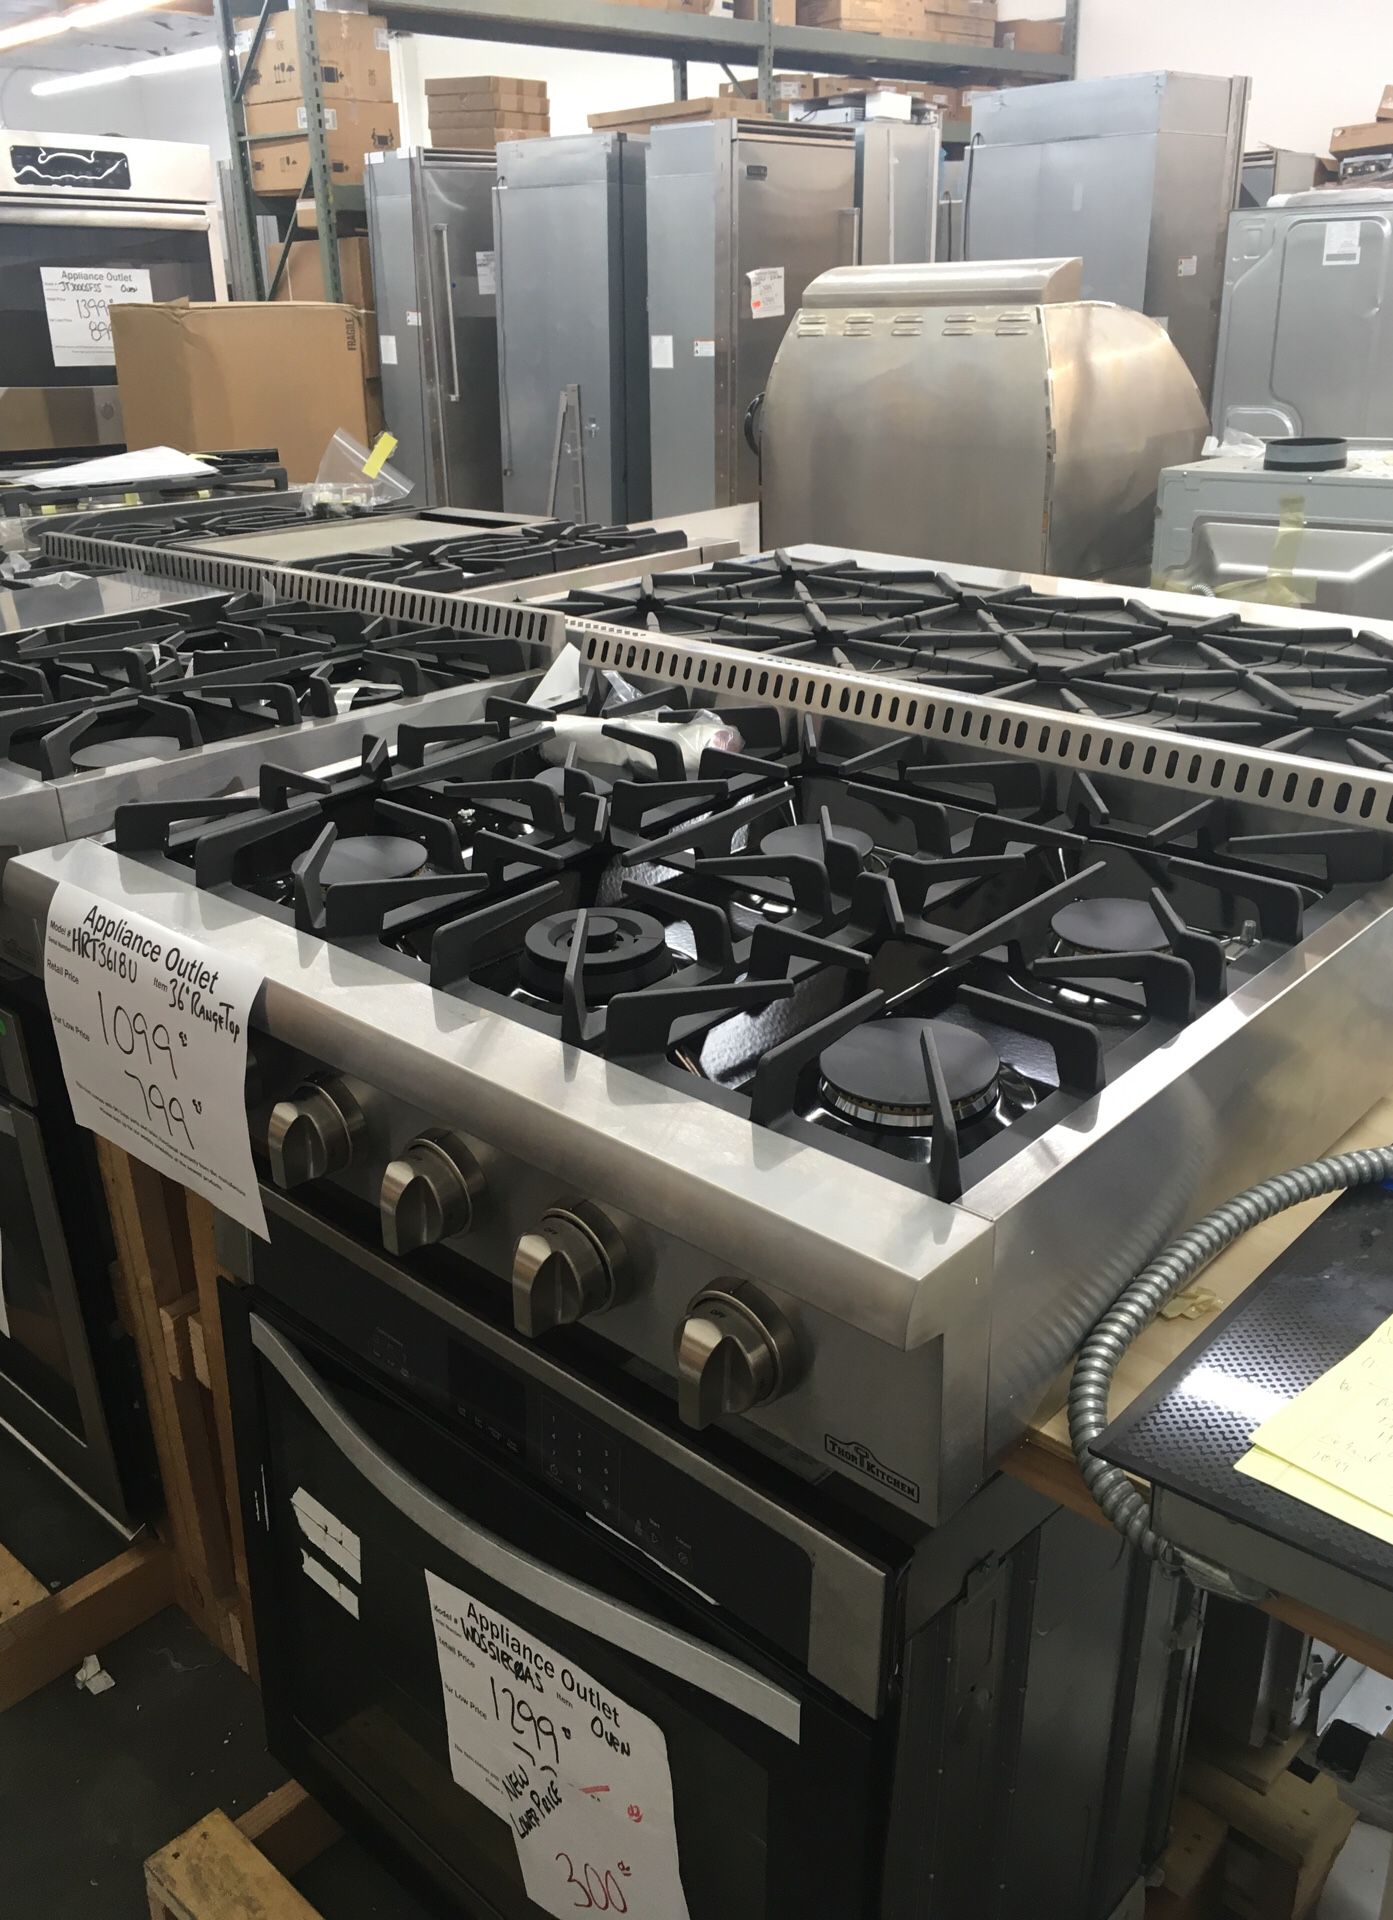 Warehouse full discounted high end appliances